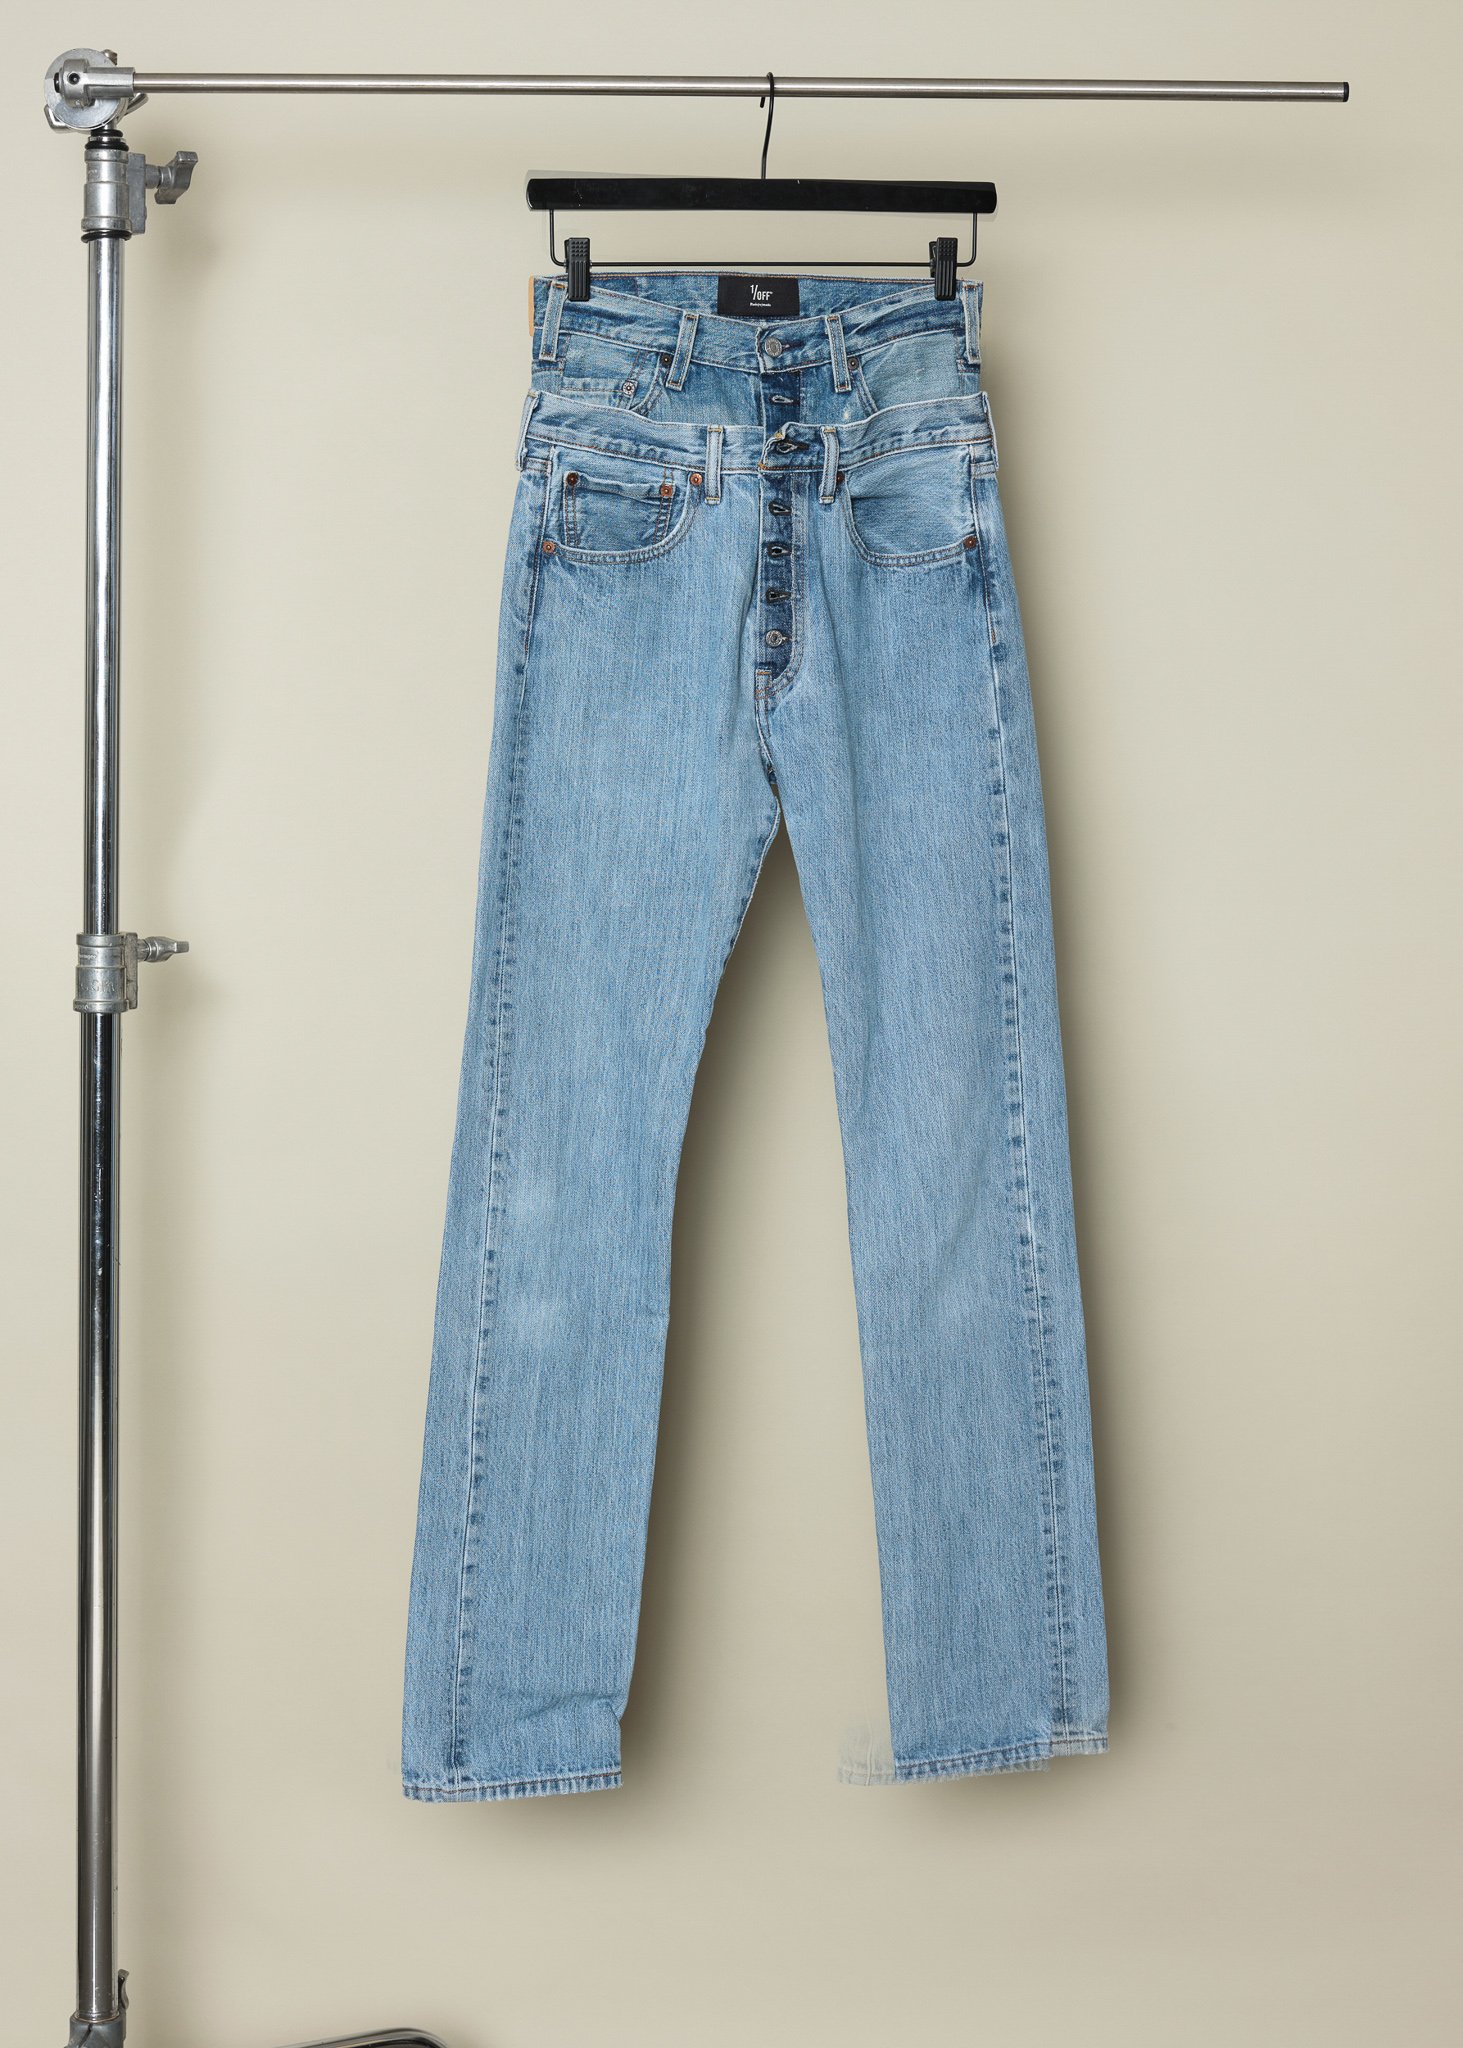 7 Pieces of Upcycled Denim That Breath New Life Into Old Jeans